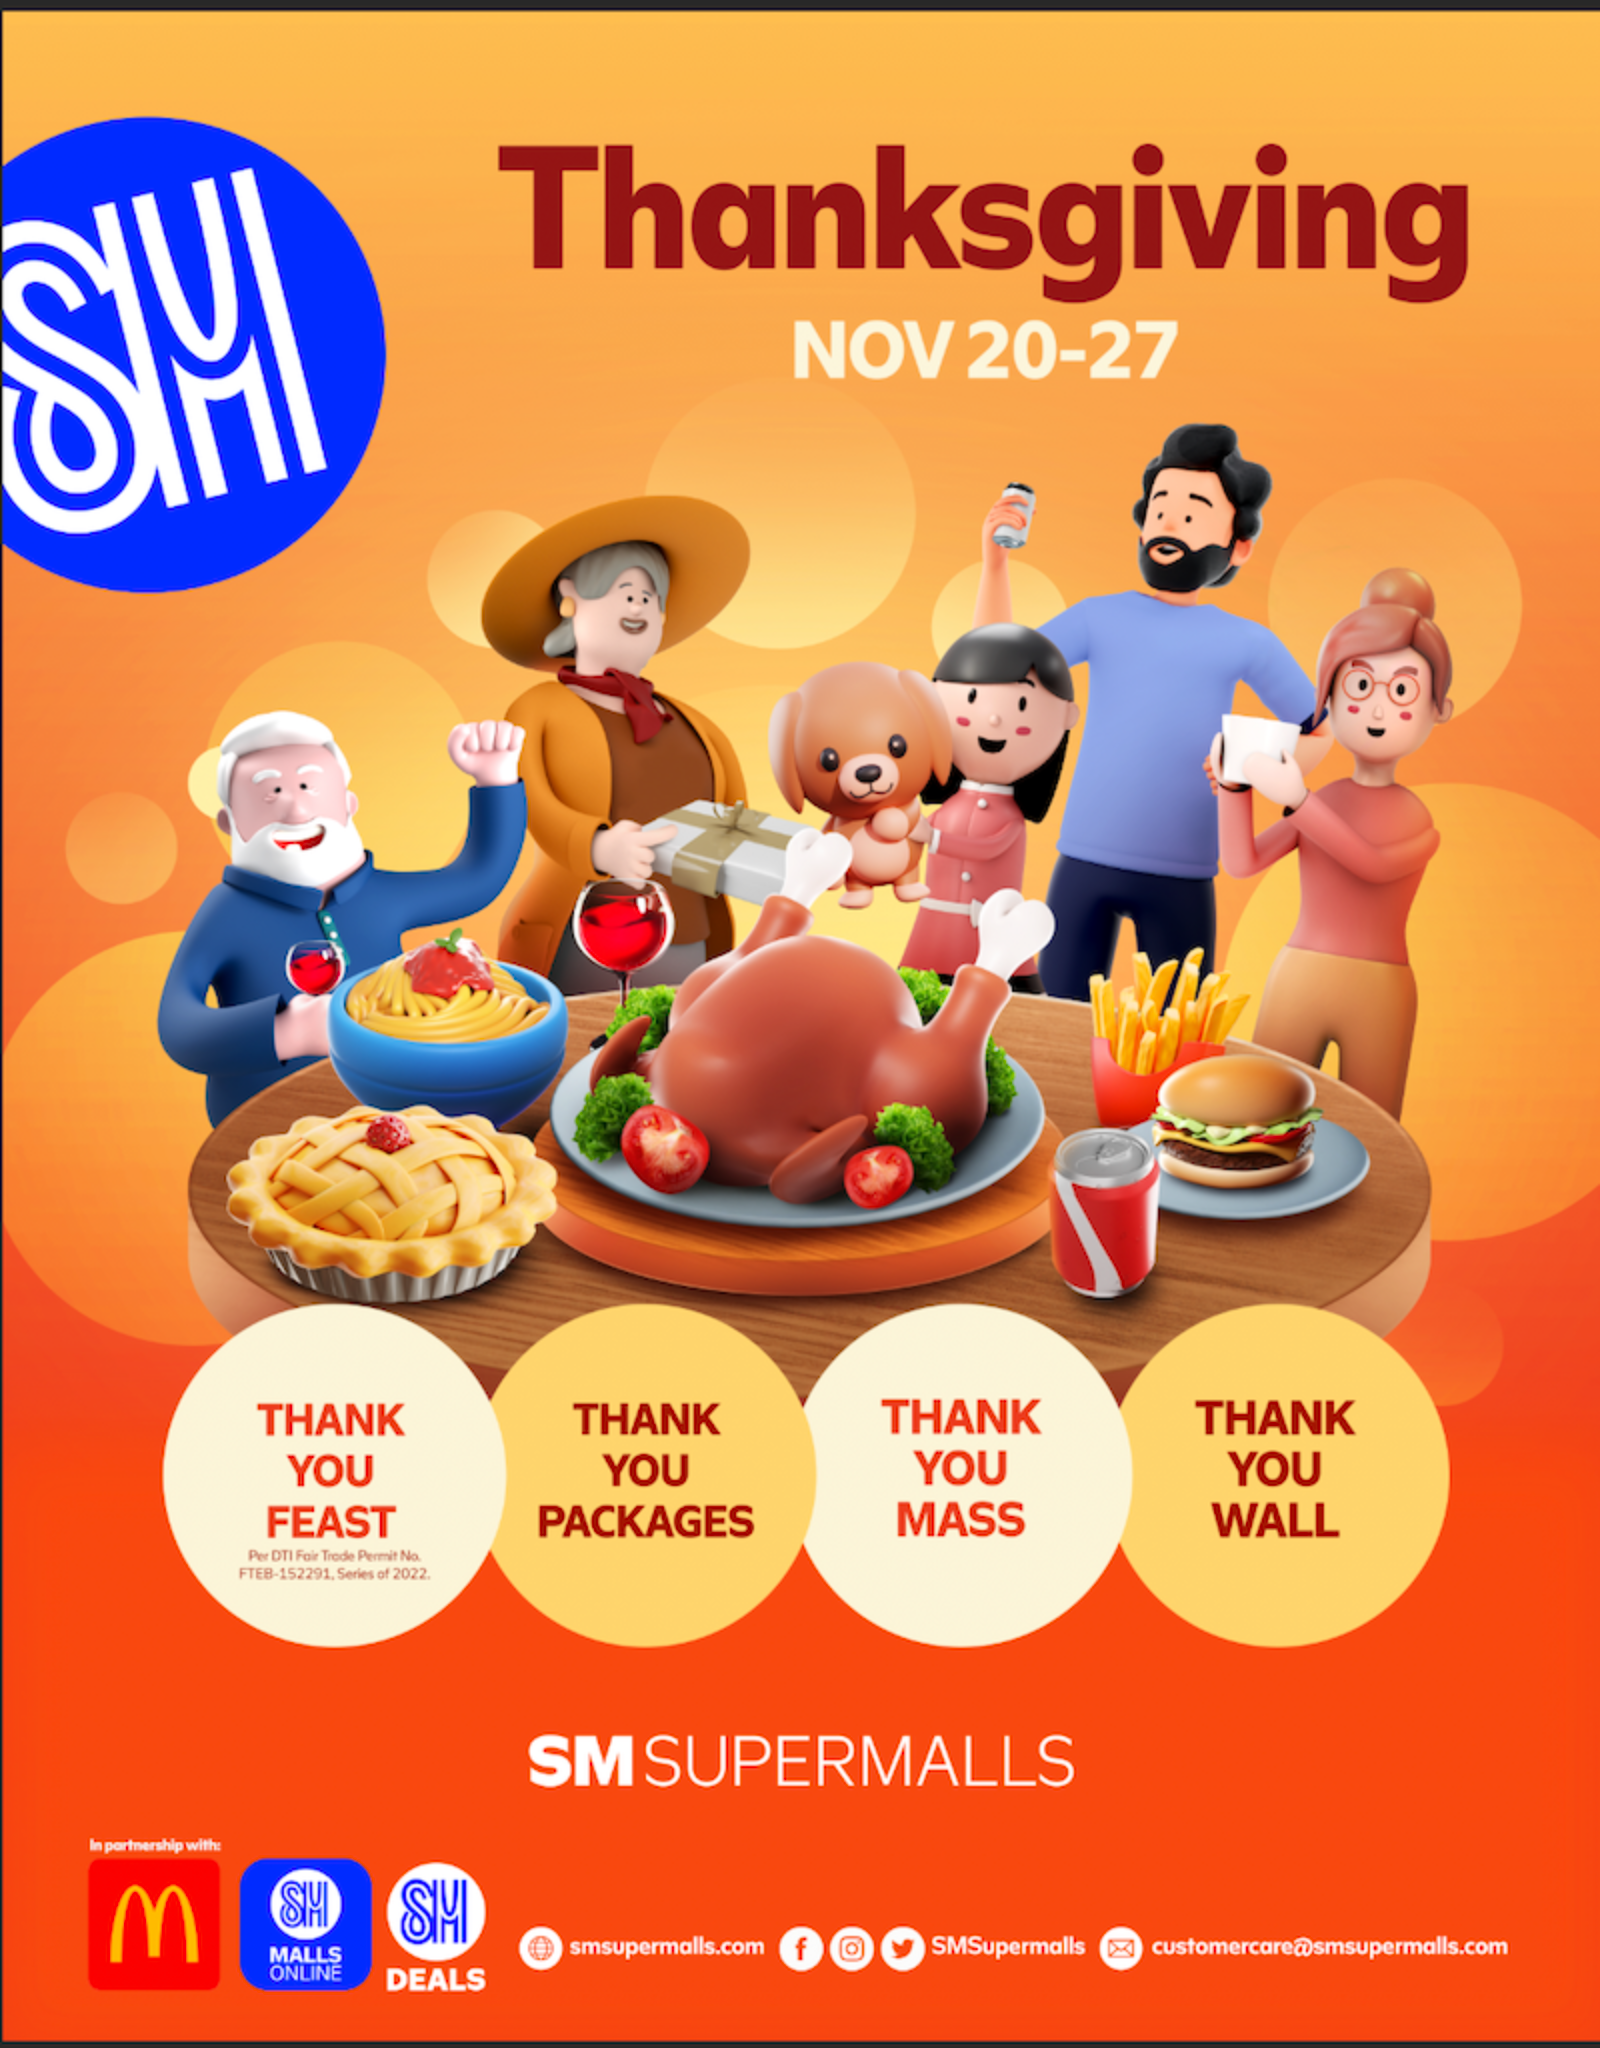 Eat, Pray, and Love this Thanksgiving  with SM Supermalls!